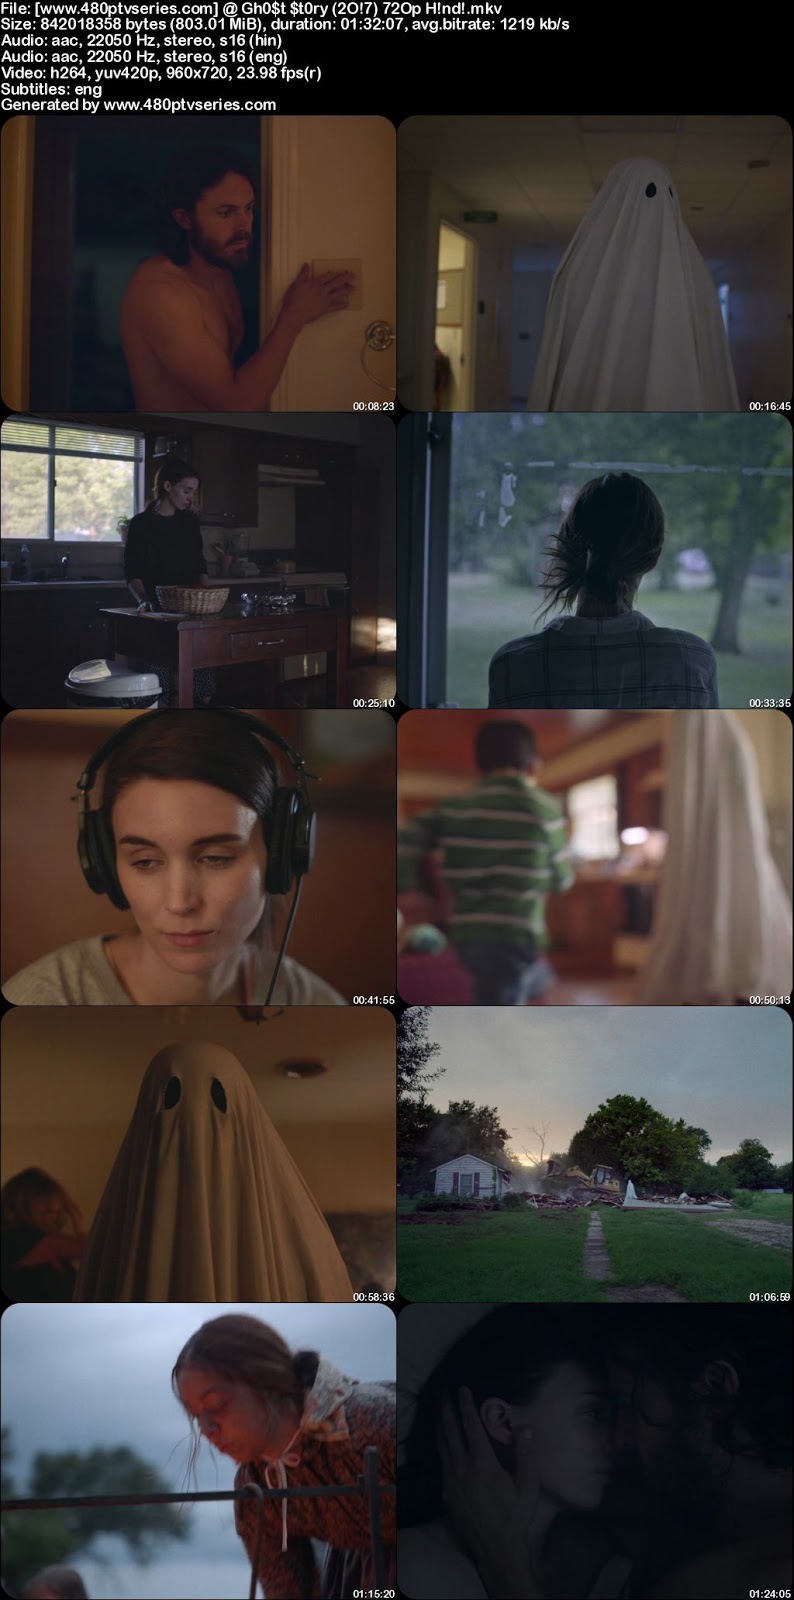 Watch Online Free A Ghost Story (2017) Full Hindi Dual Audio Movie Download 480p 720p Bluray